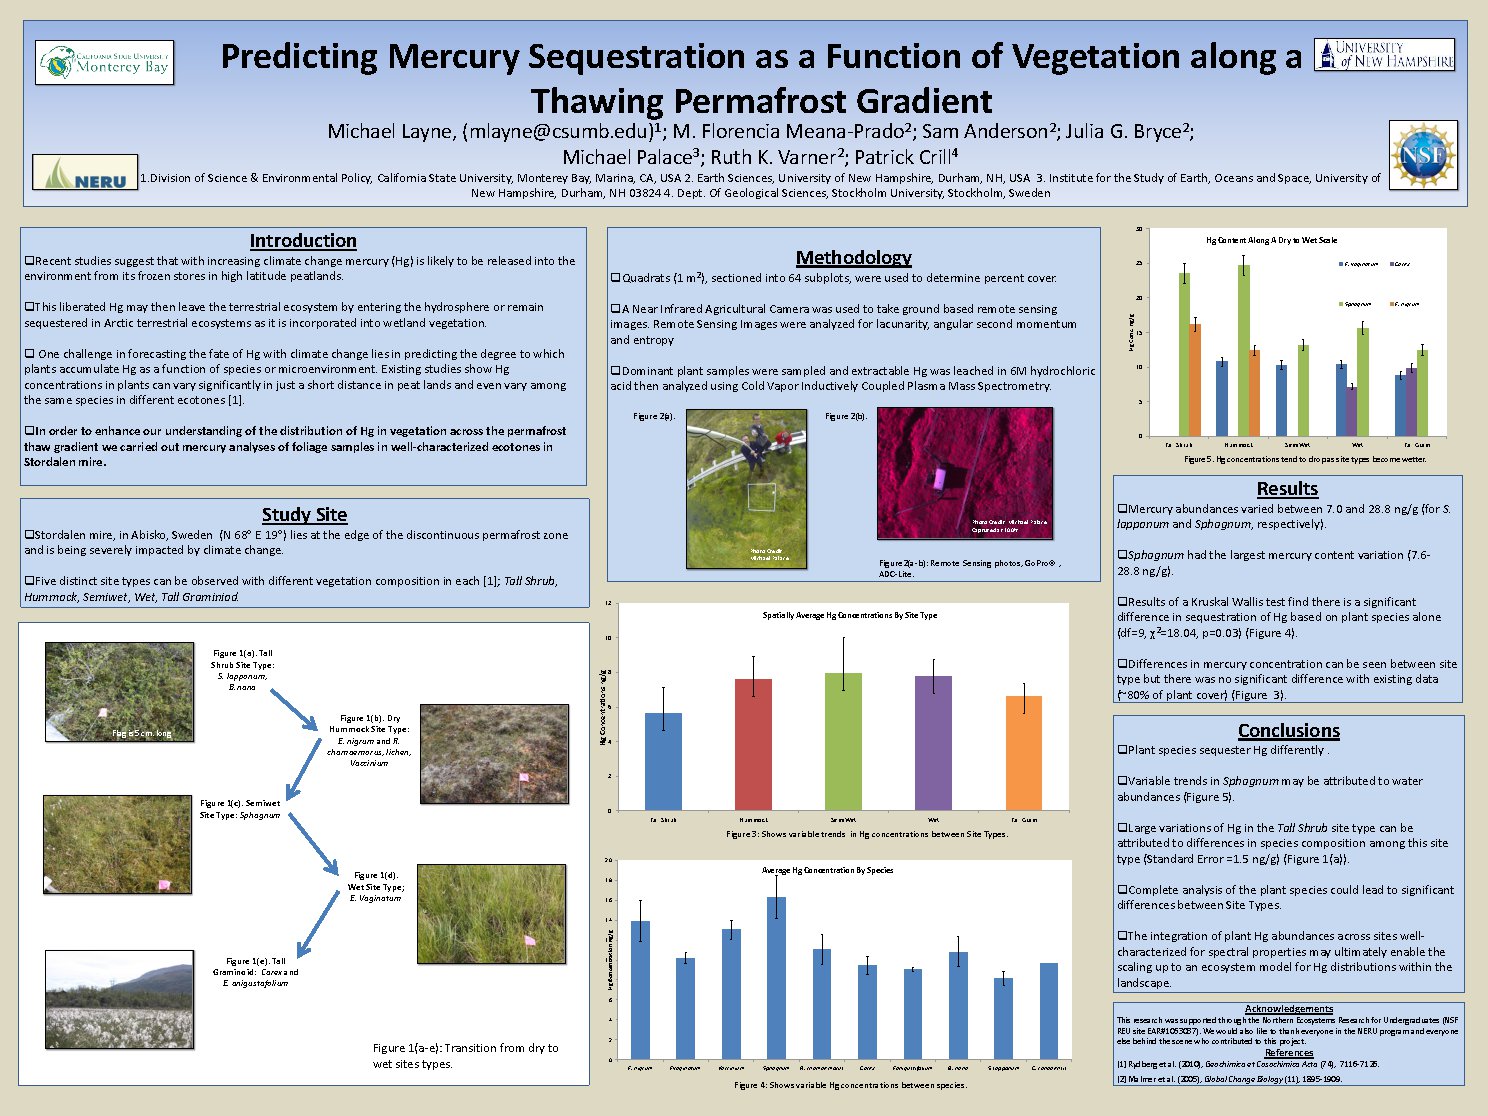 Predicting Mercury Sequestration As A Function Of Vegetation Along A Thawing Permafrost Gradient by layn9743